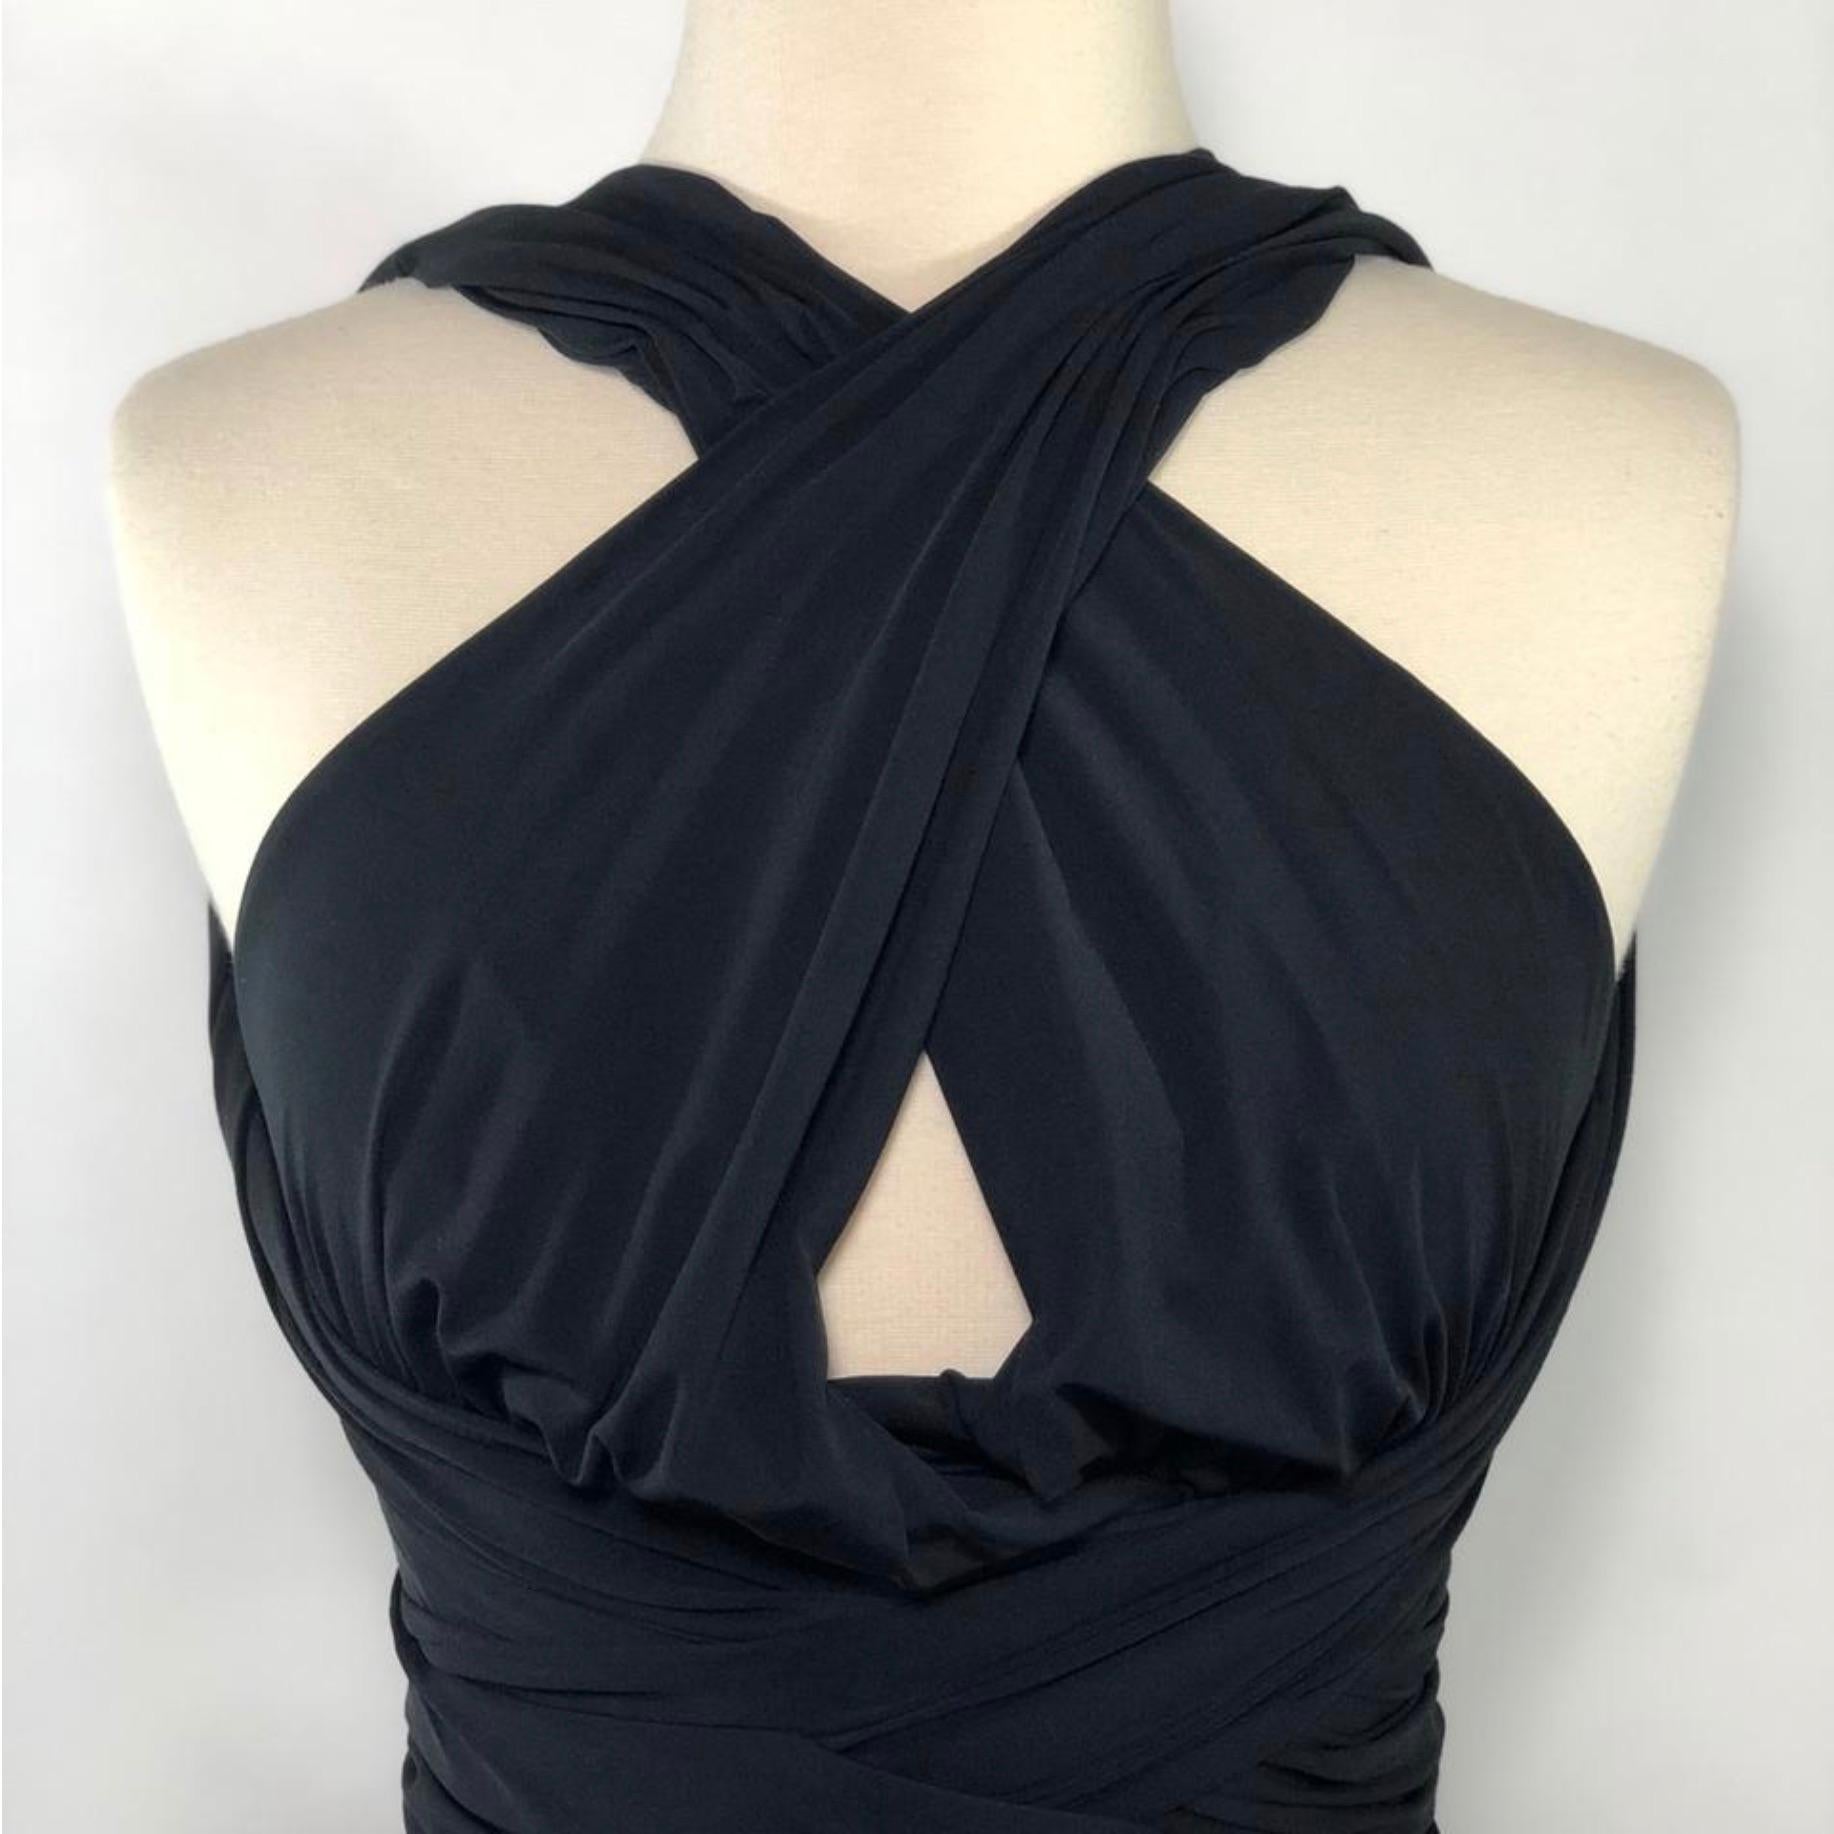  Halston Heritage Cutout Knotted Stretch-Jersey Gown in Black Size 2 In Excellent Condition For Sale In Saint Charles, IL